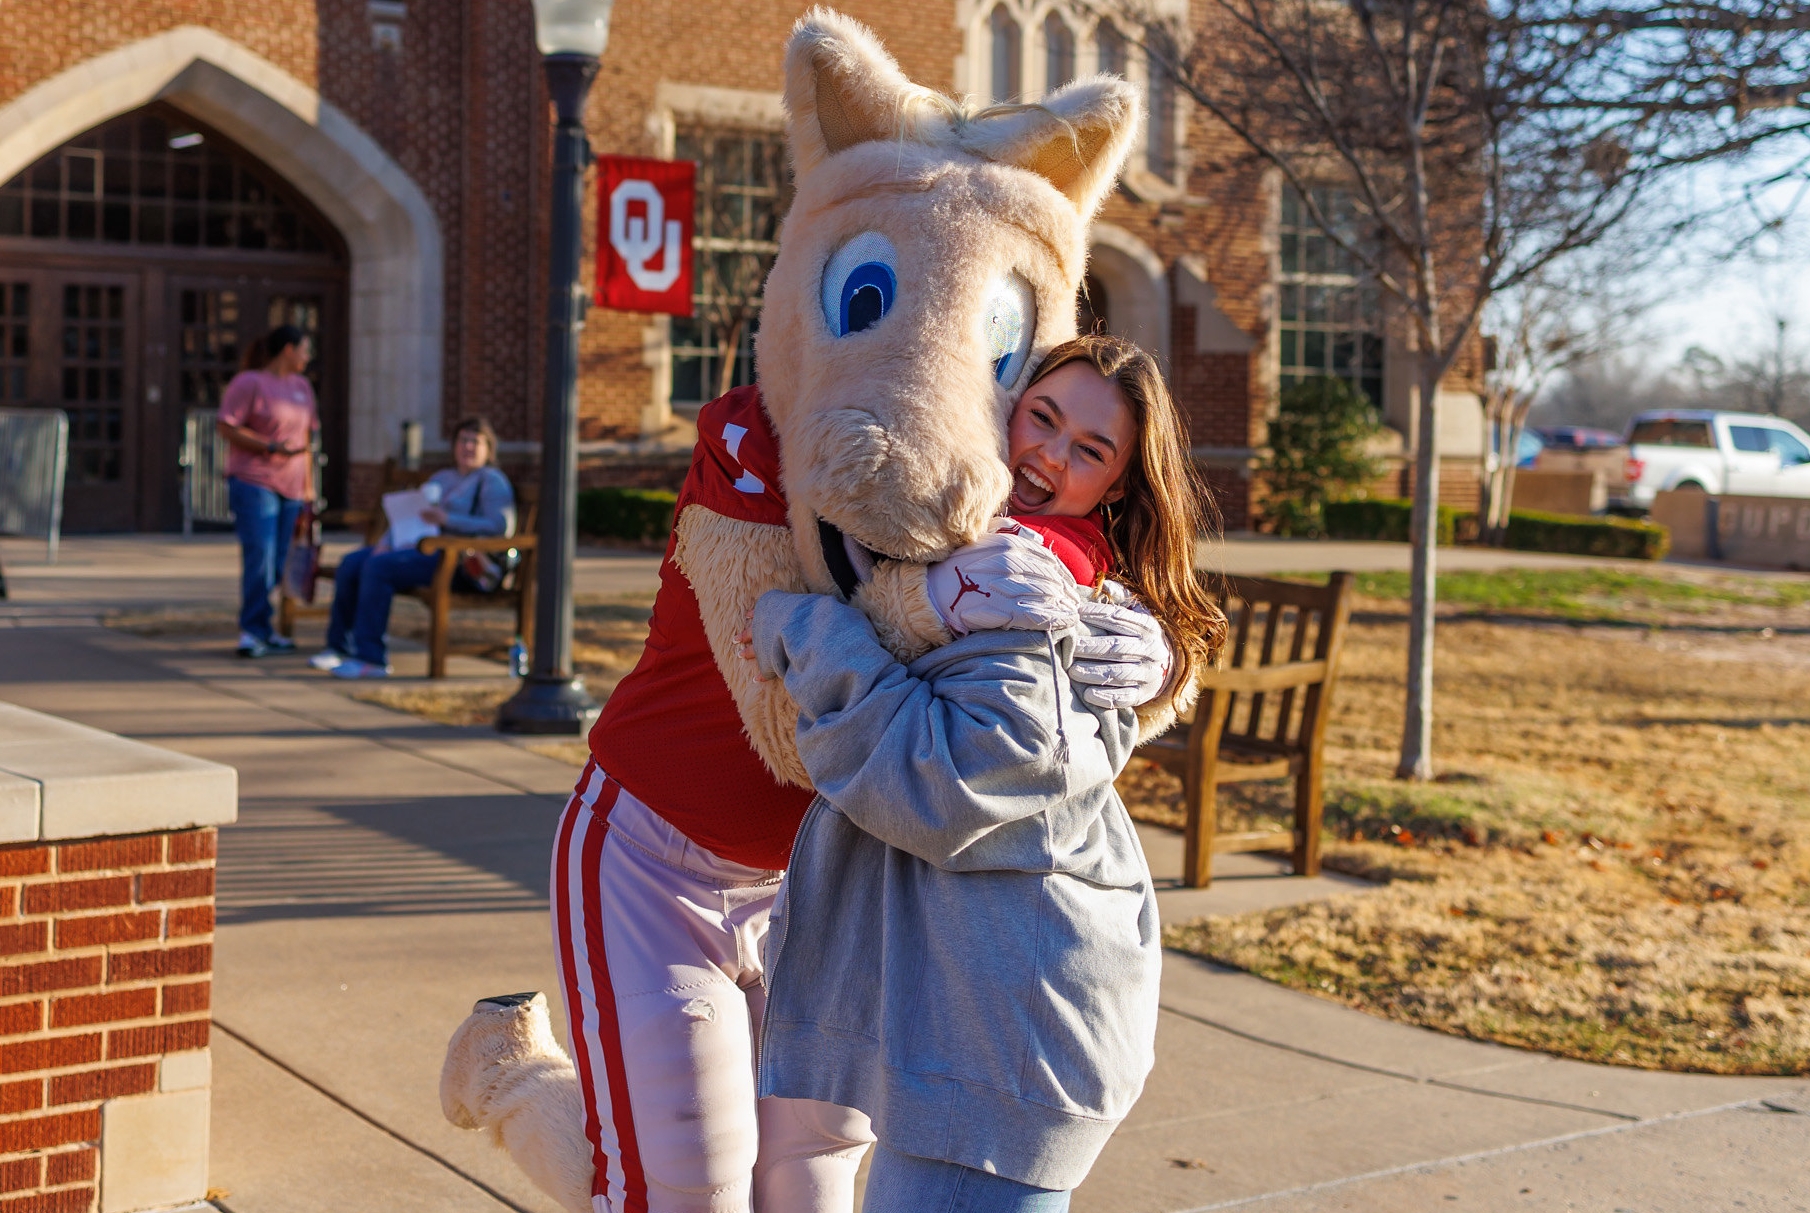 Student at an OU event hugging OU's mascot.